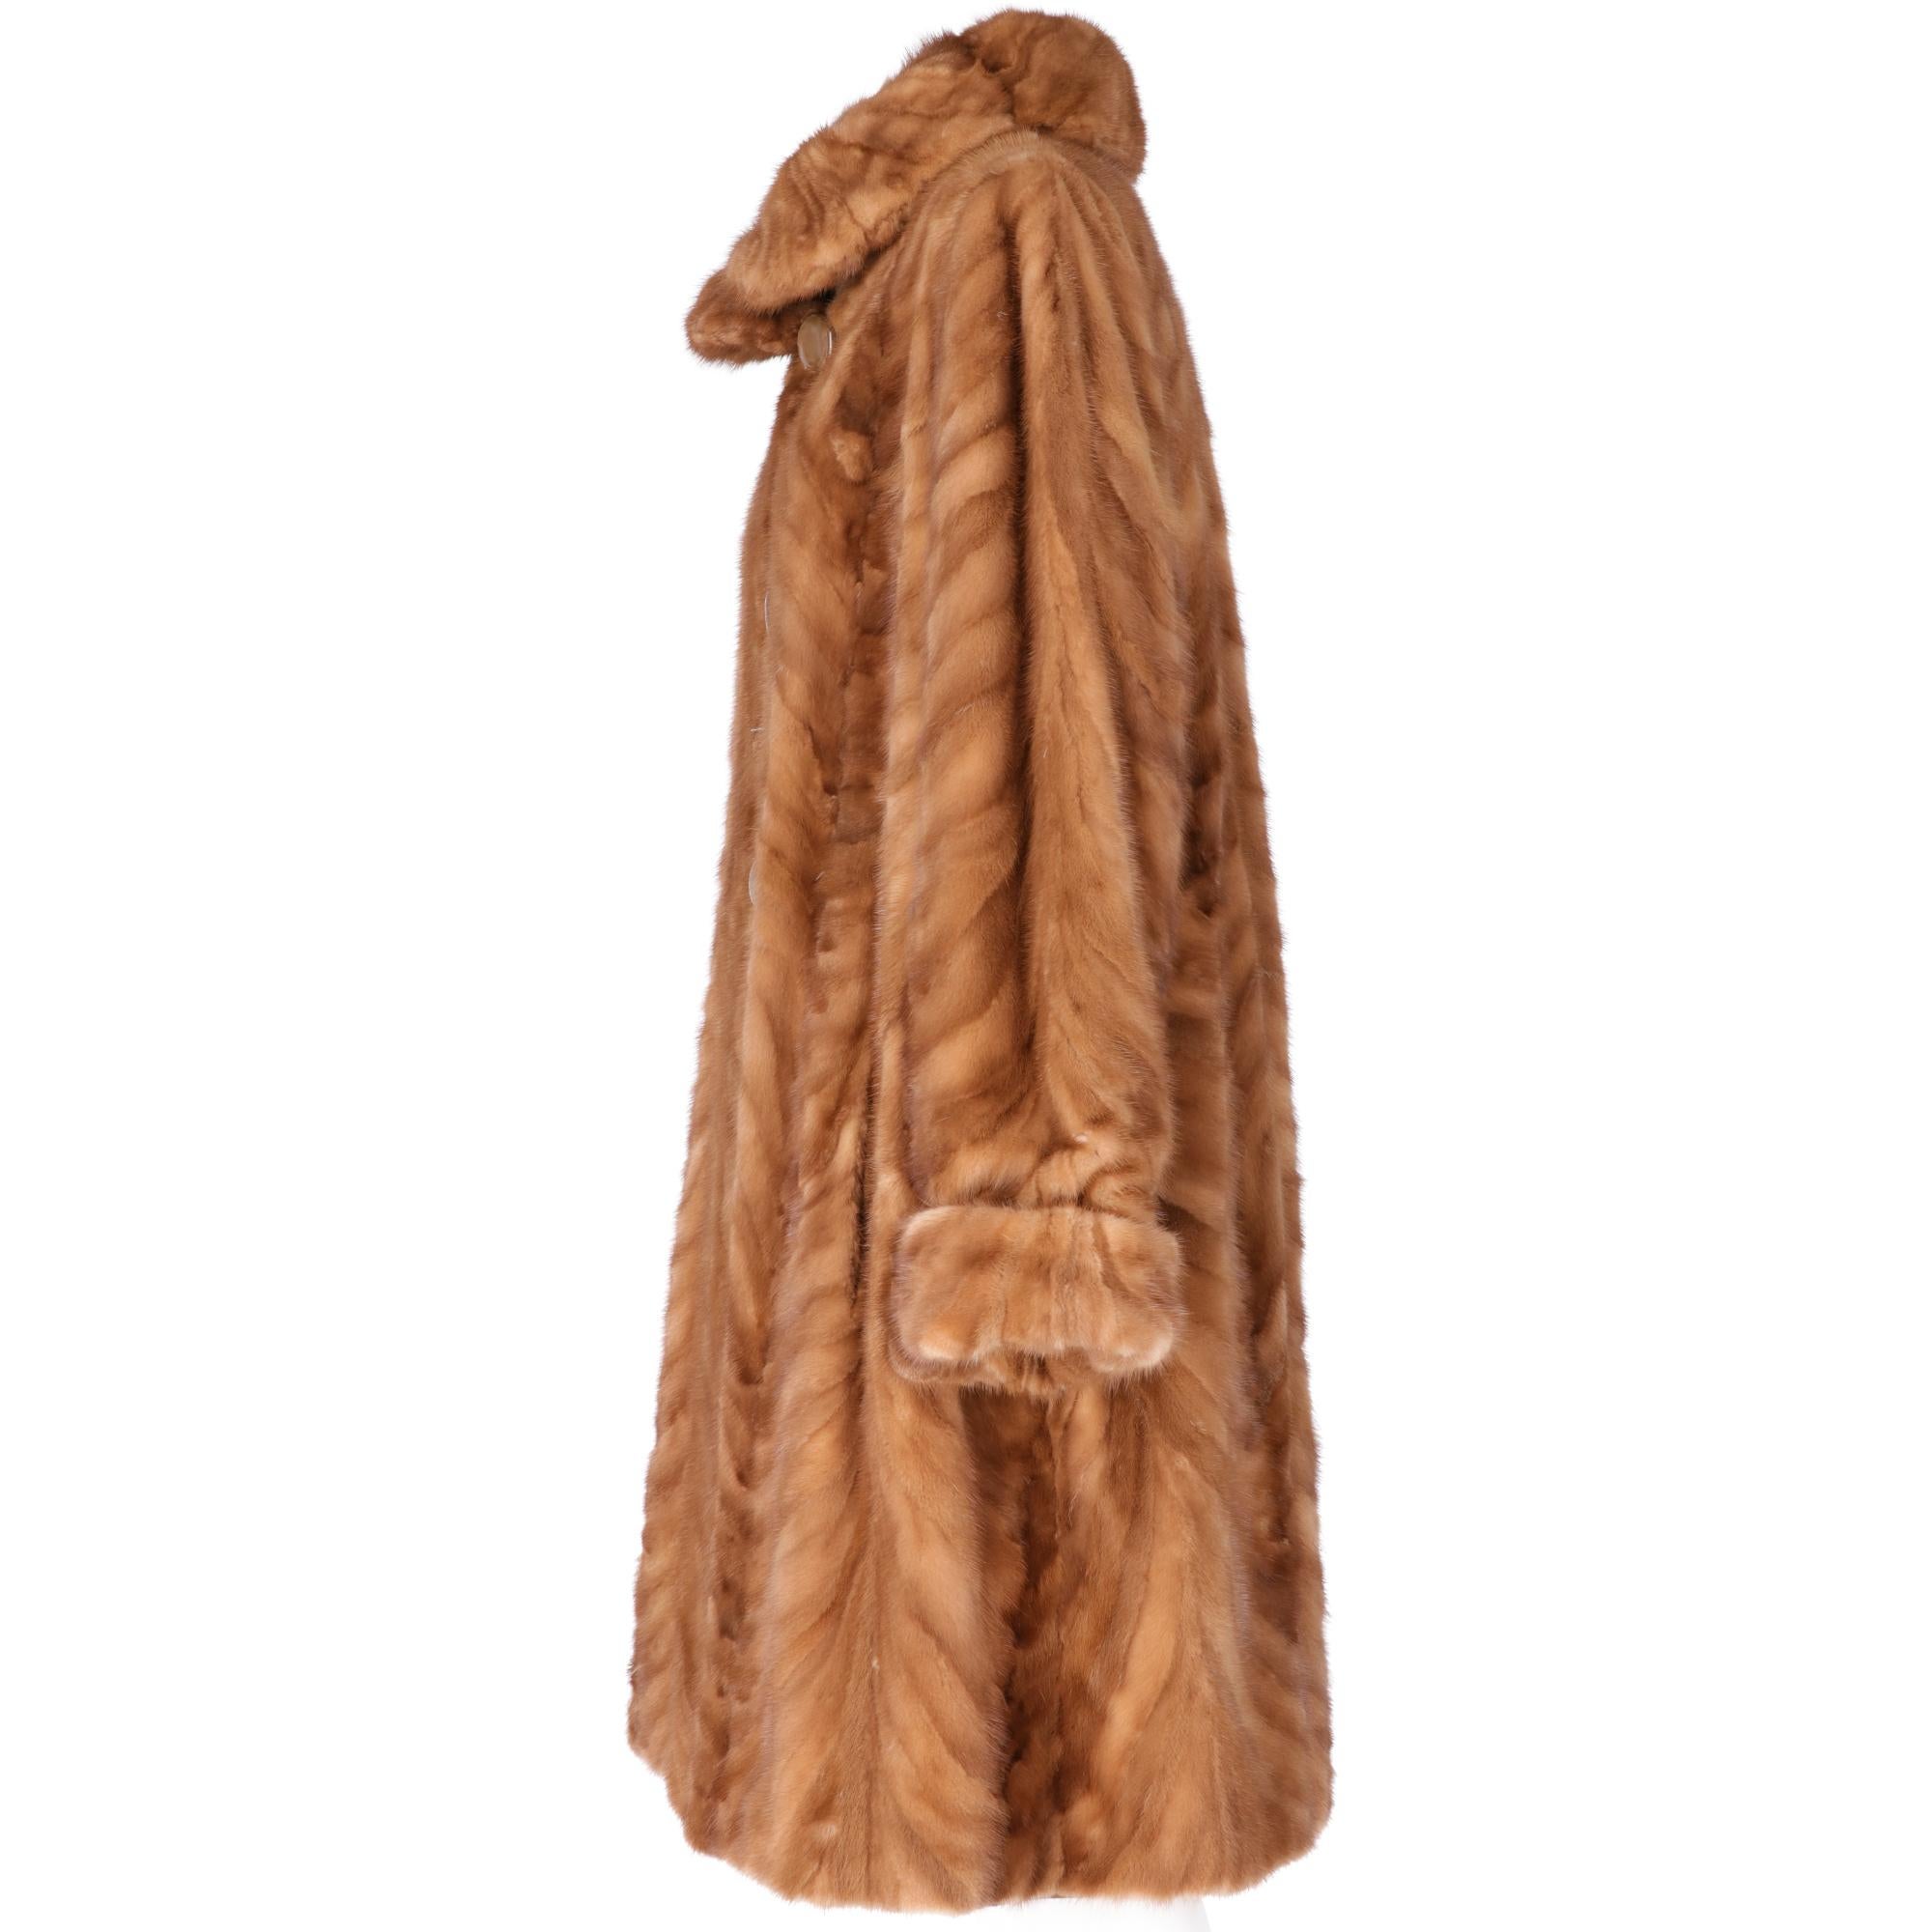 Reversible brown mink fur long below the knees, with round collar. The fur side has two hidden pockets on the front, large beige hemispherical buttons, the fabric side made of bronze-colored iridescent silk taffeta with welt pockets, lacing with